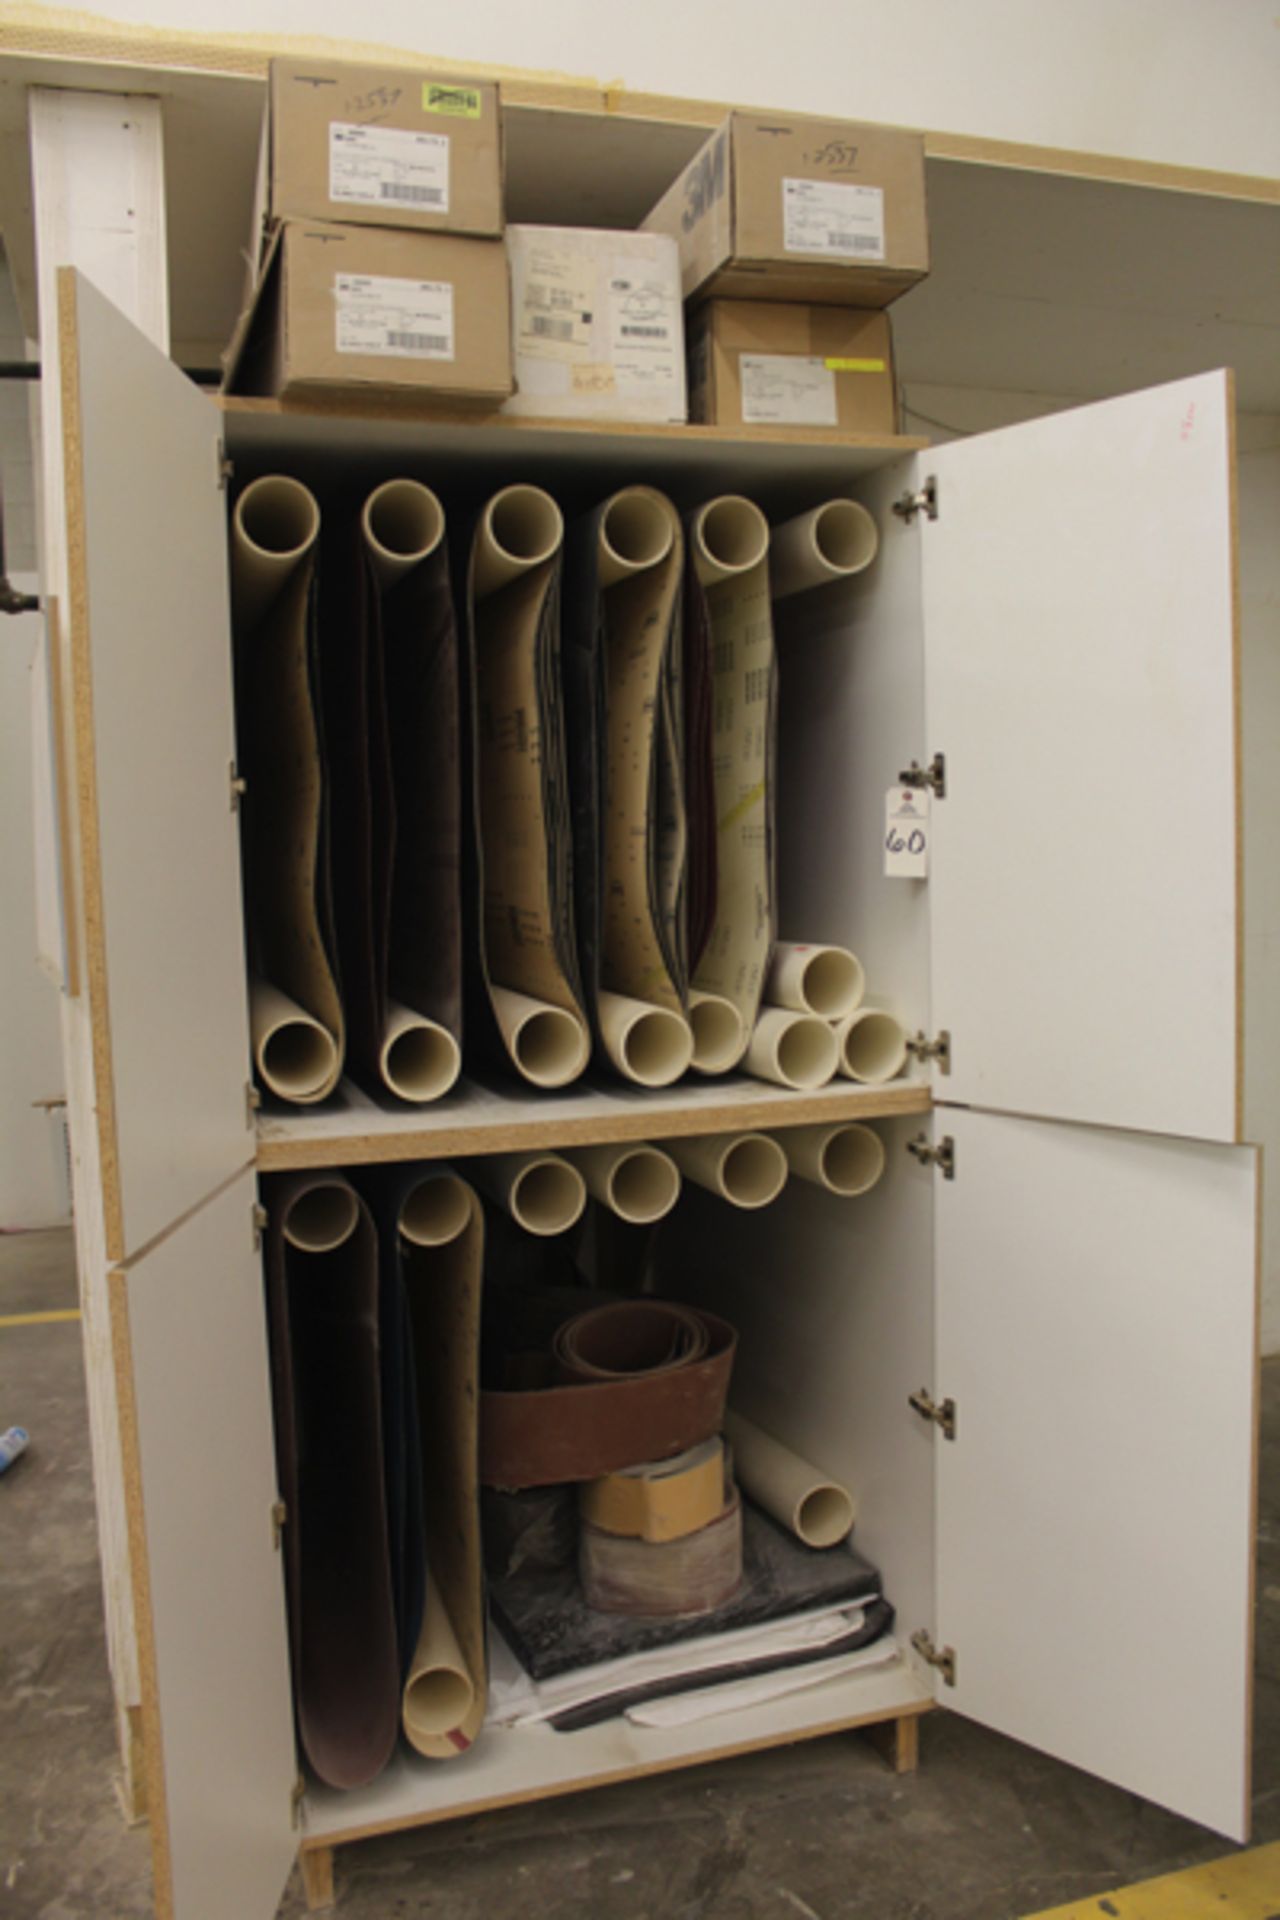 Cabinet, W/ Contents, Abrasive Belts | Rigging Price: $75